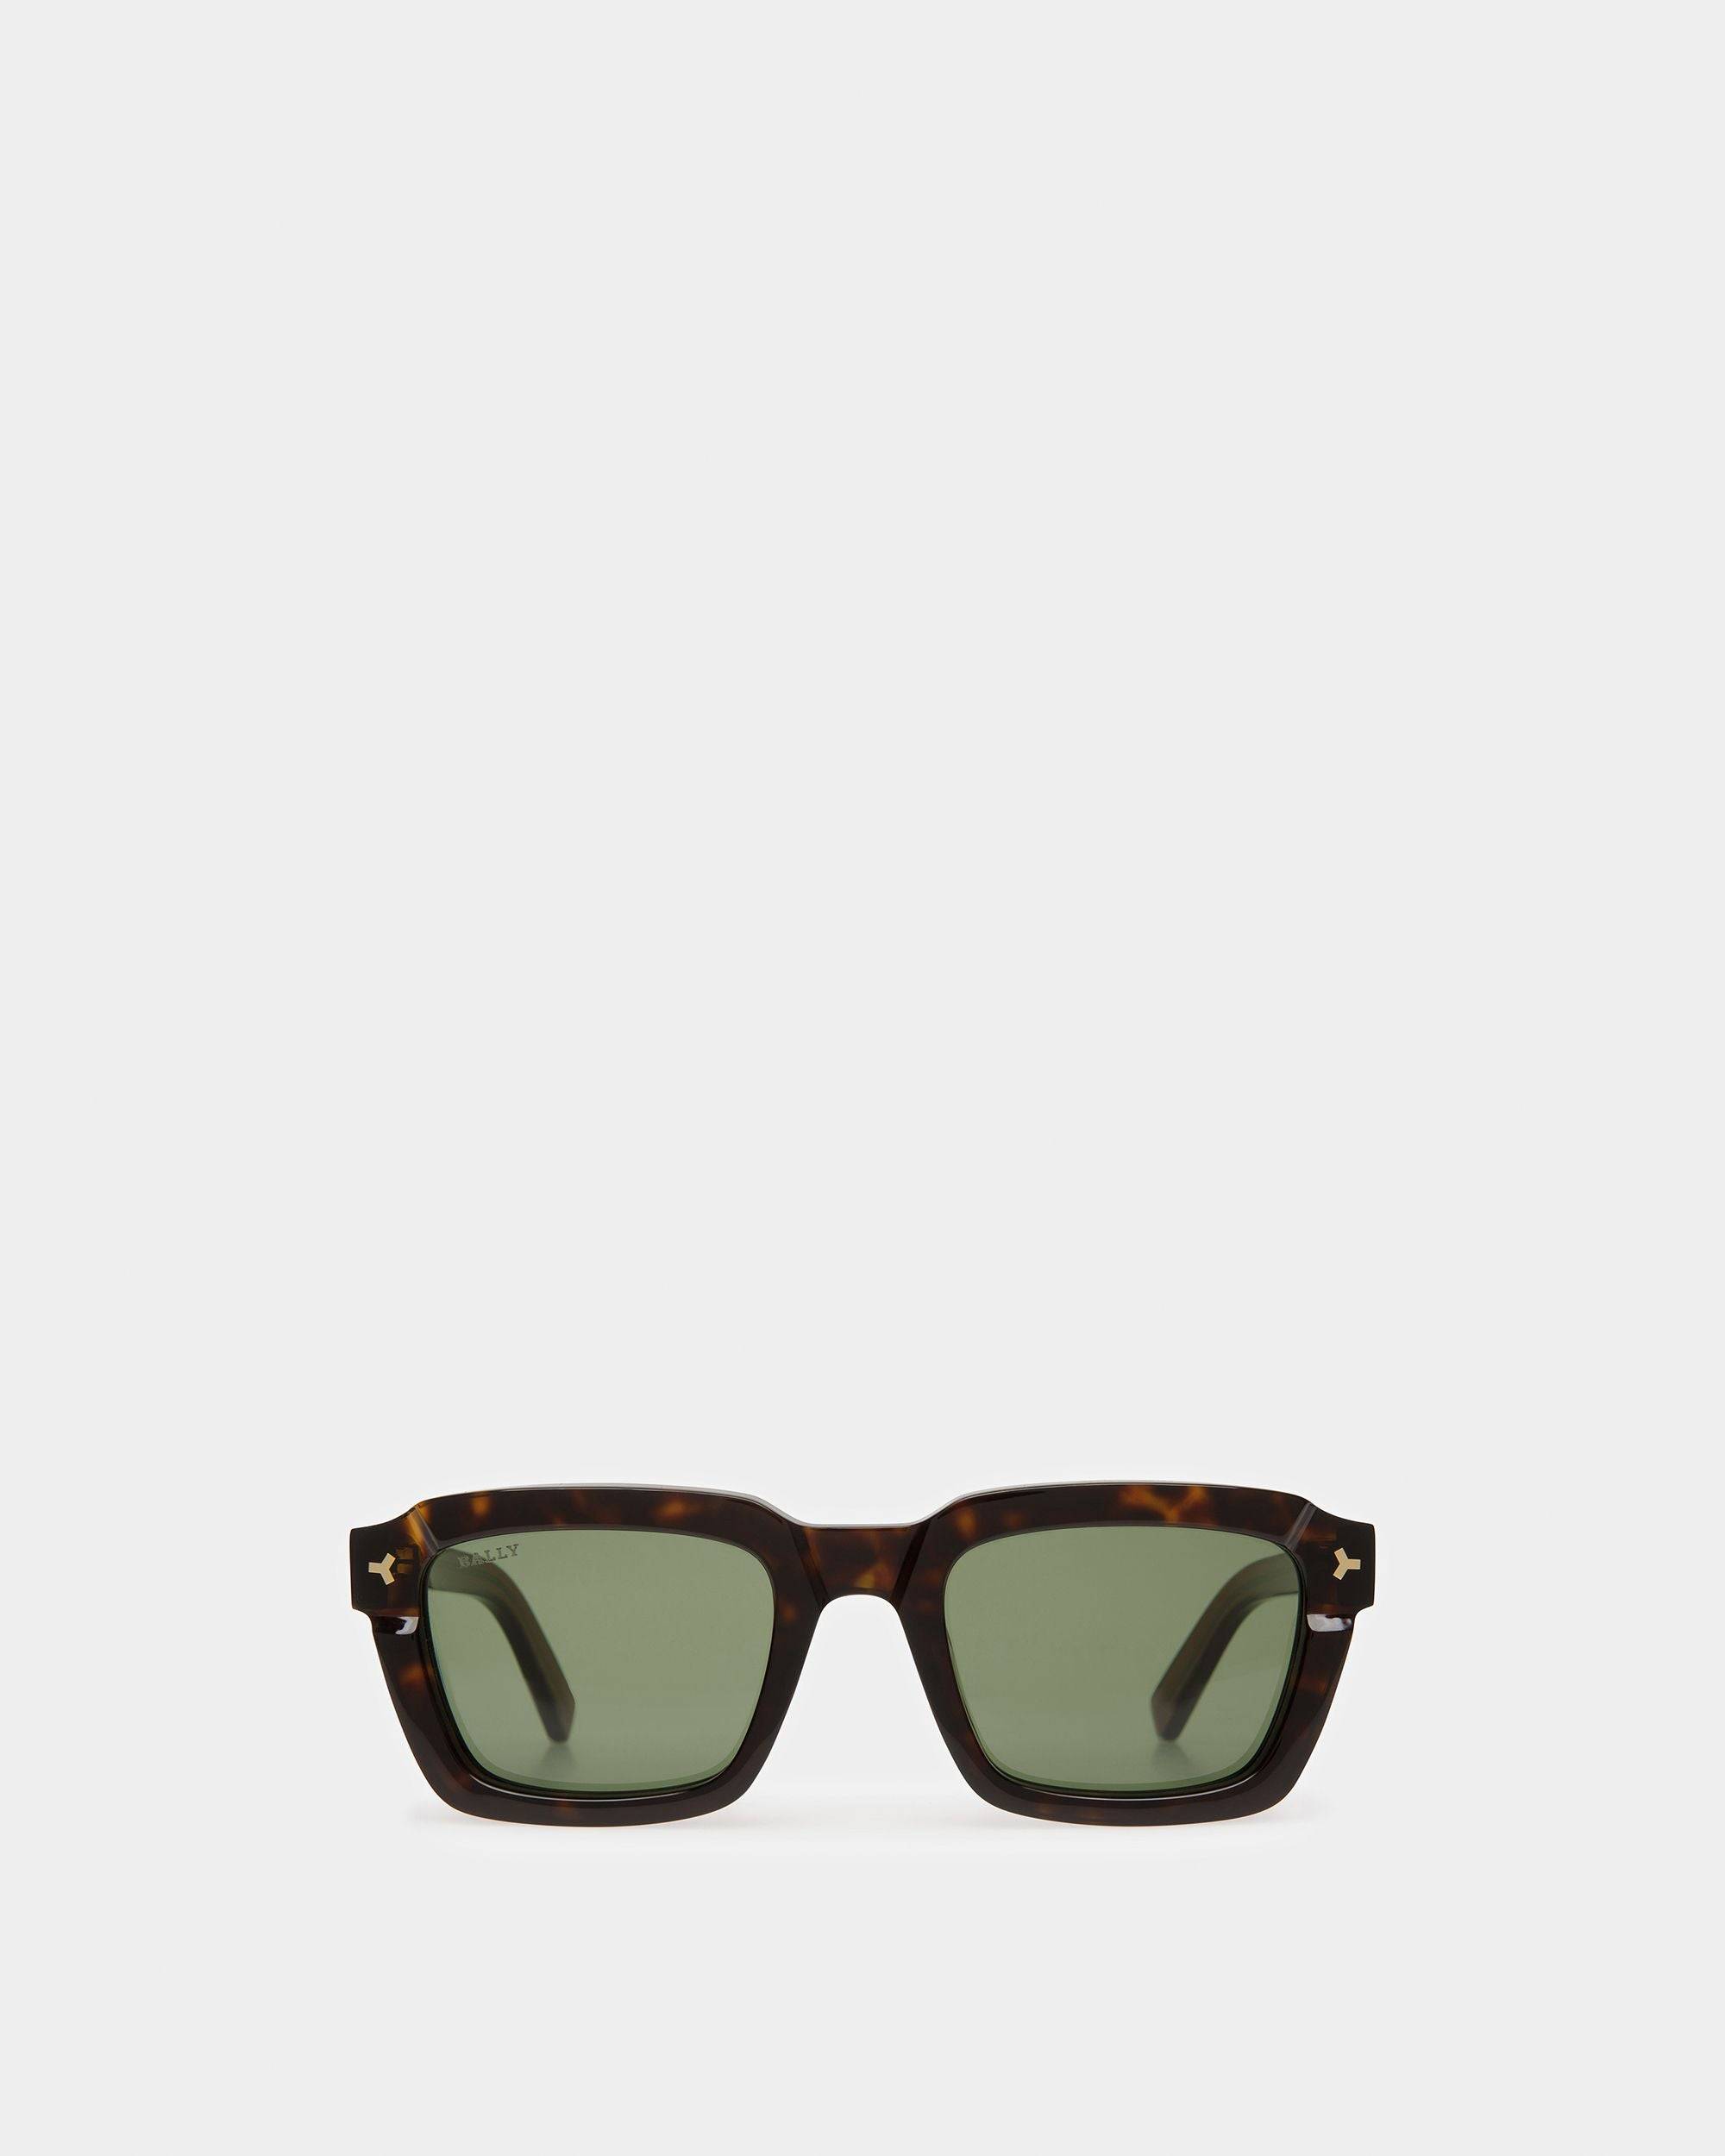 Bally sunglasses BY 0027 20B - Contact lenses, sunglasses an